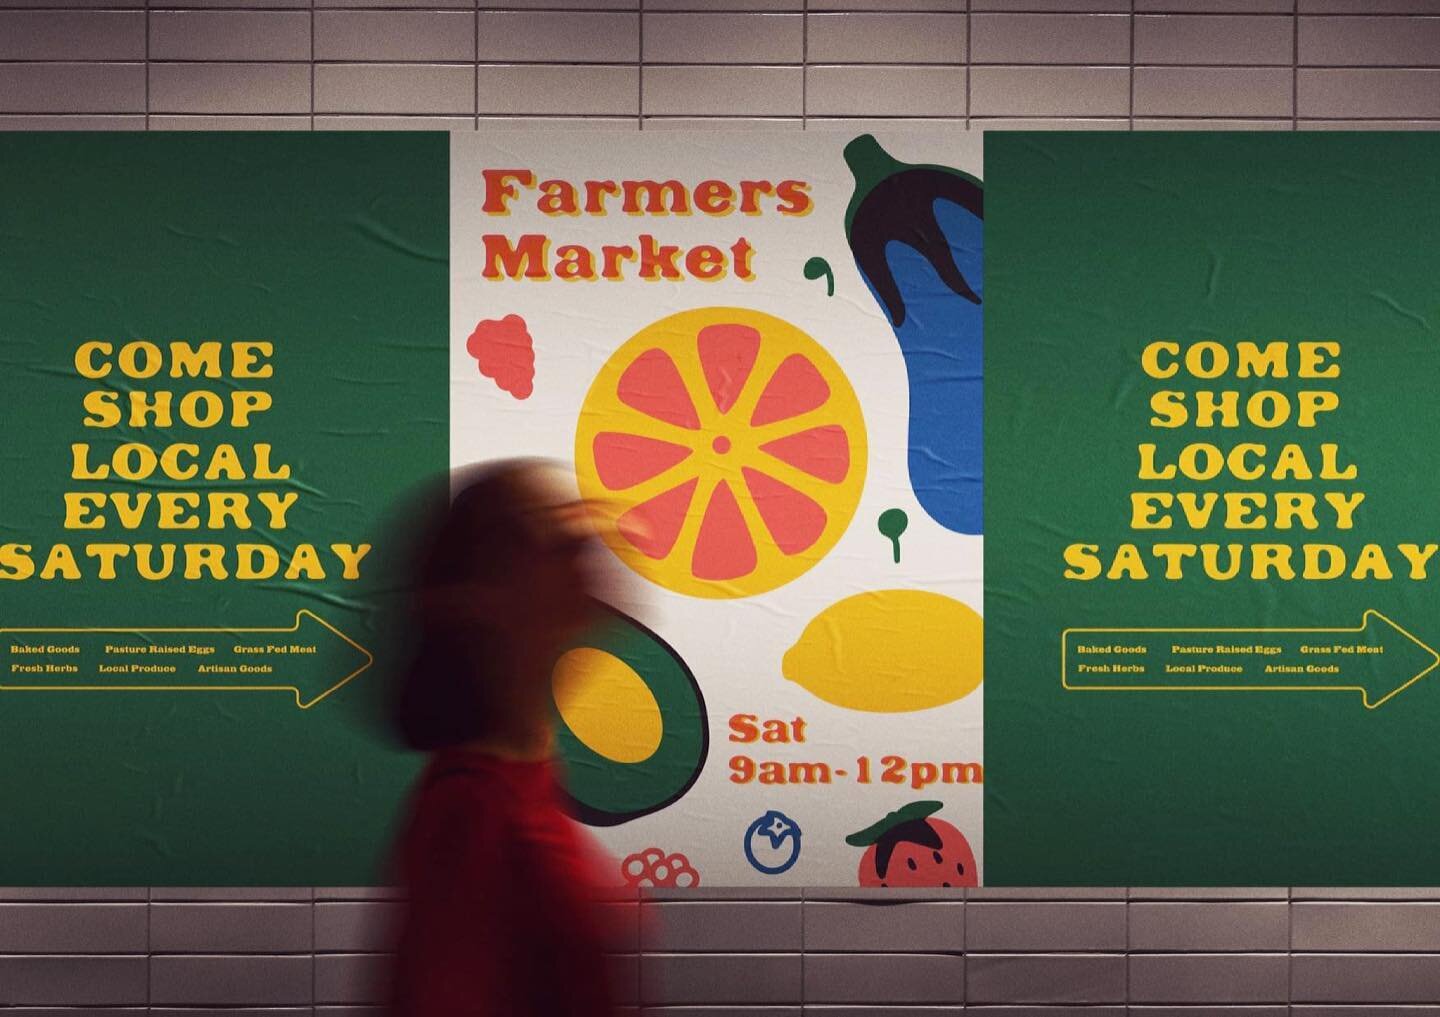 Come shop local 🌱🍓🍉🥦 inspired by my favorite farmers market @ptreefarmersmkt shop local produce as much as you can, it taste better too ;) 
.
.
.
.
.
.
.
#posterdesign #cityposter #posterart #graphicdesigner #postermockups #shoplocal #shoplocalpo